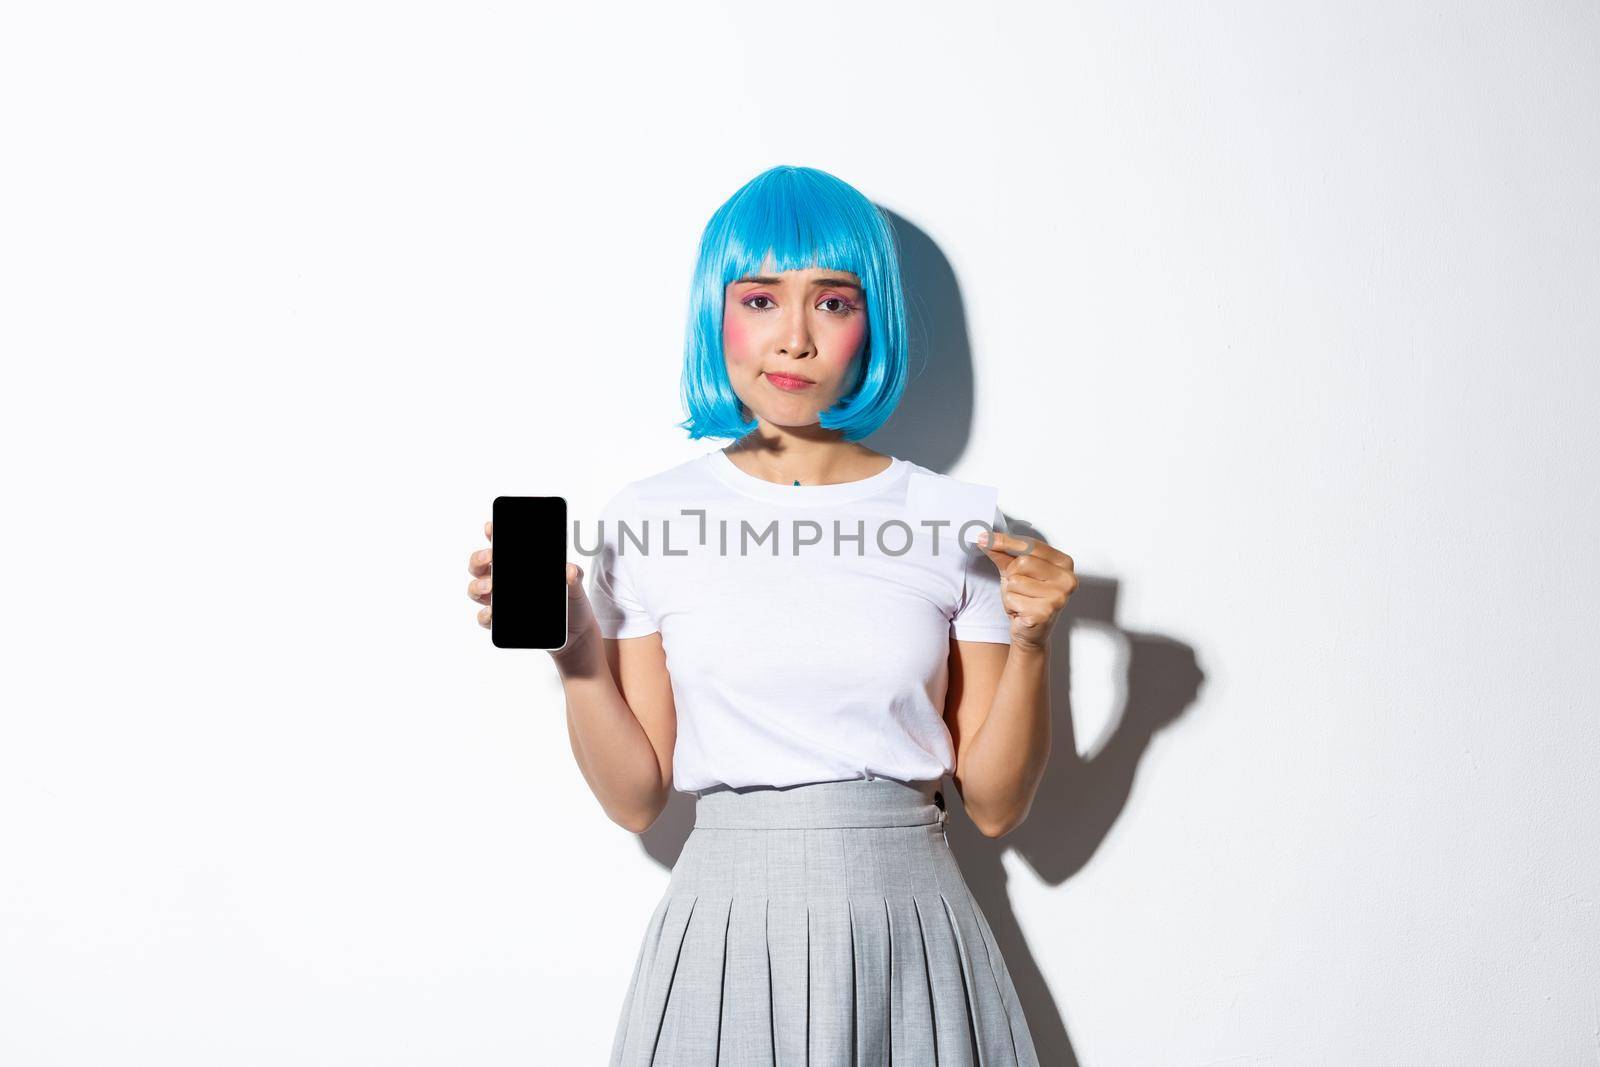 Portrait of skeptical asian girl in blue party wig, looking disappointed as showing credit card and smartphone screen, standing over white background.